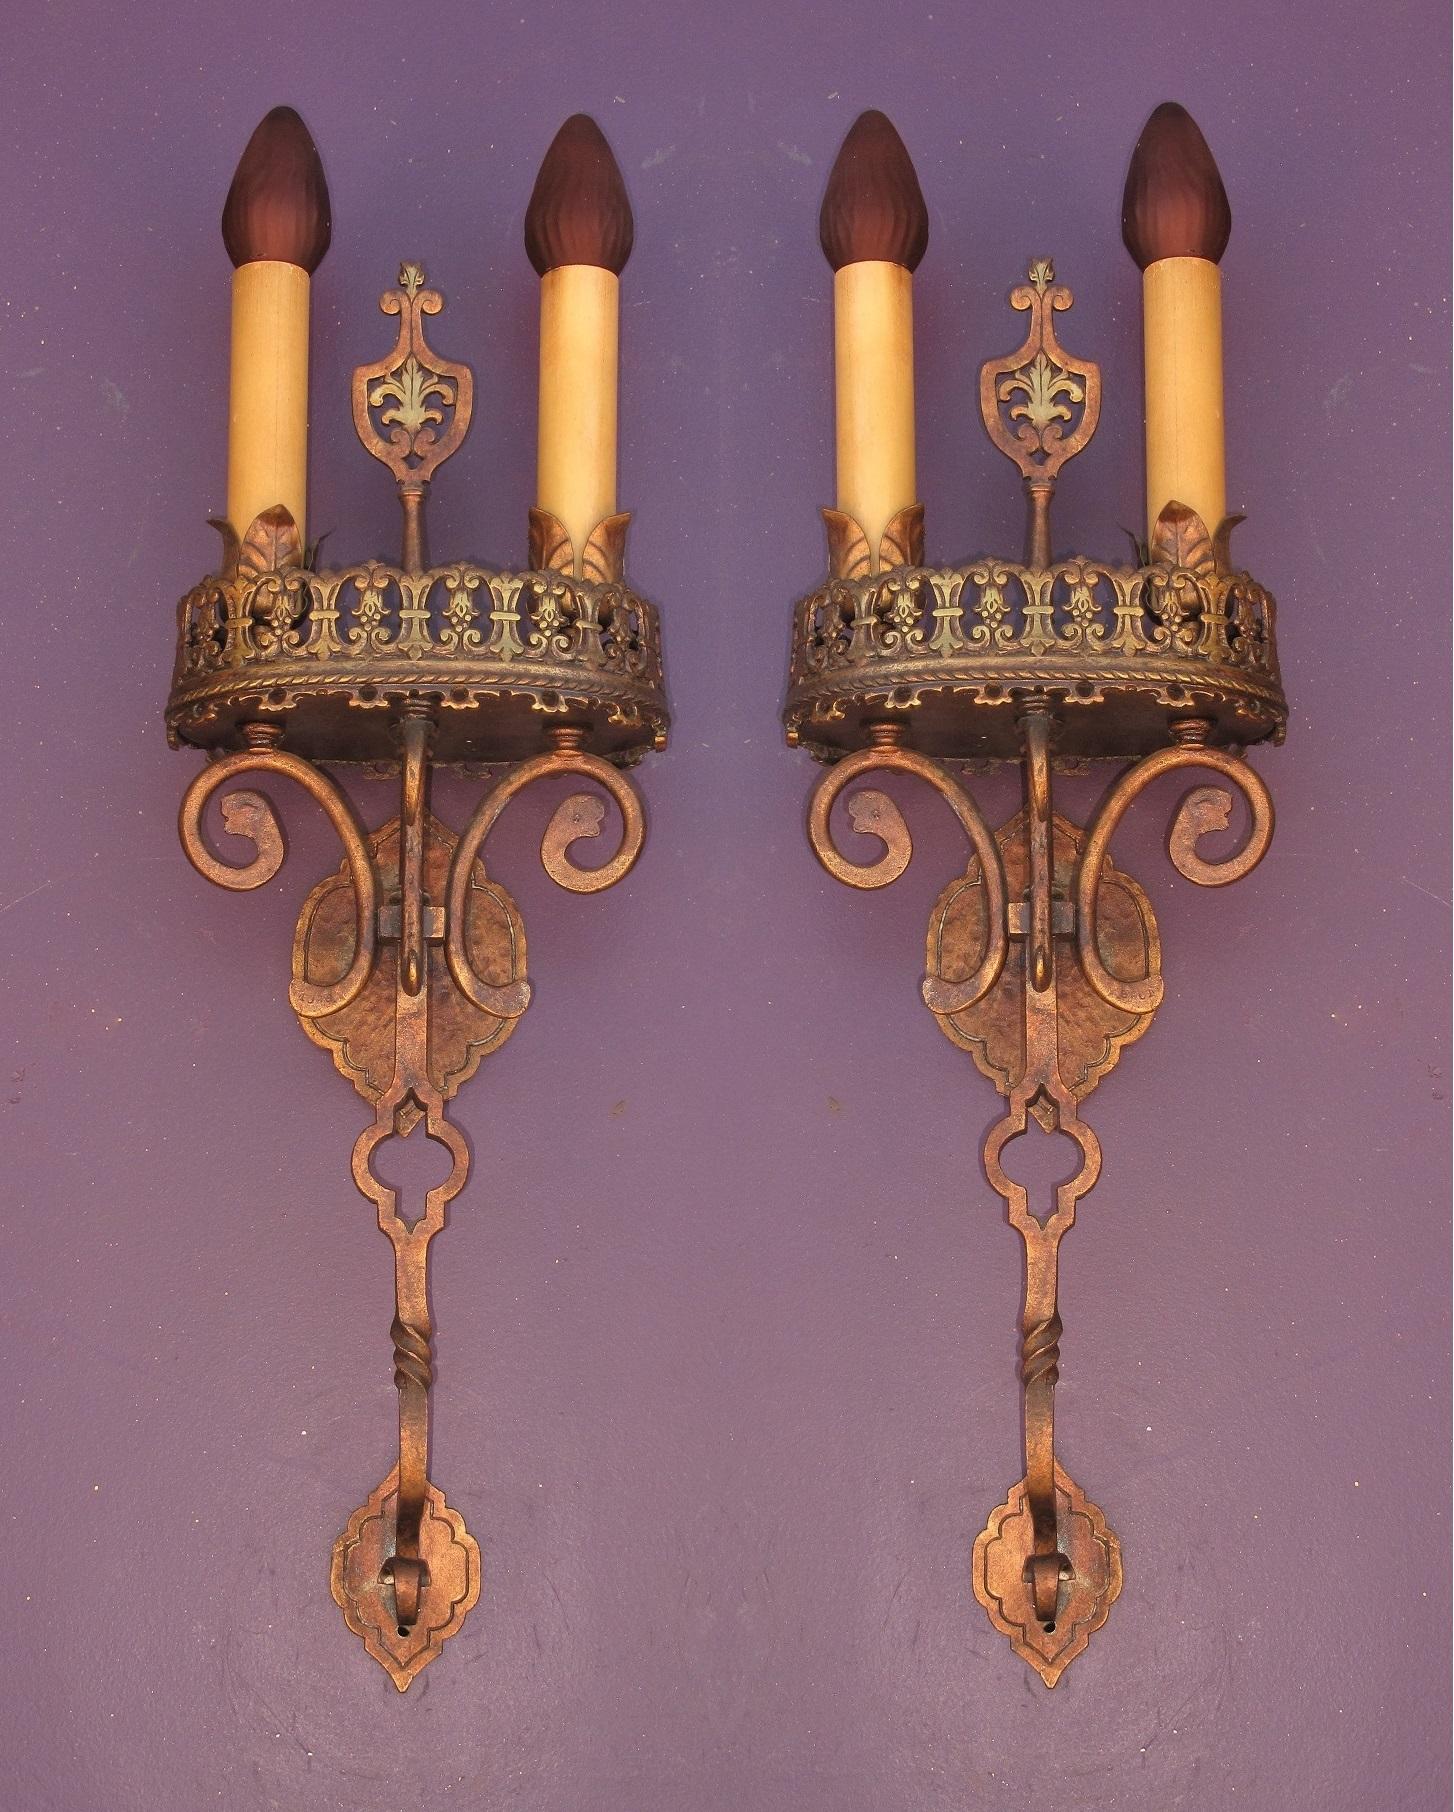 Some of the highest quality Revival Style sconces to ever come our way. The workmanship and attention to detail shows a remarkable and talented maker. Some of the details which impressed us was the thick 